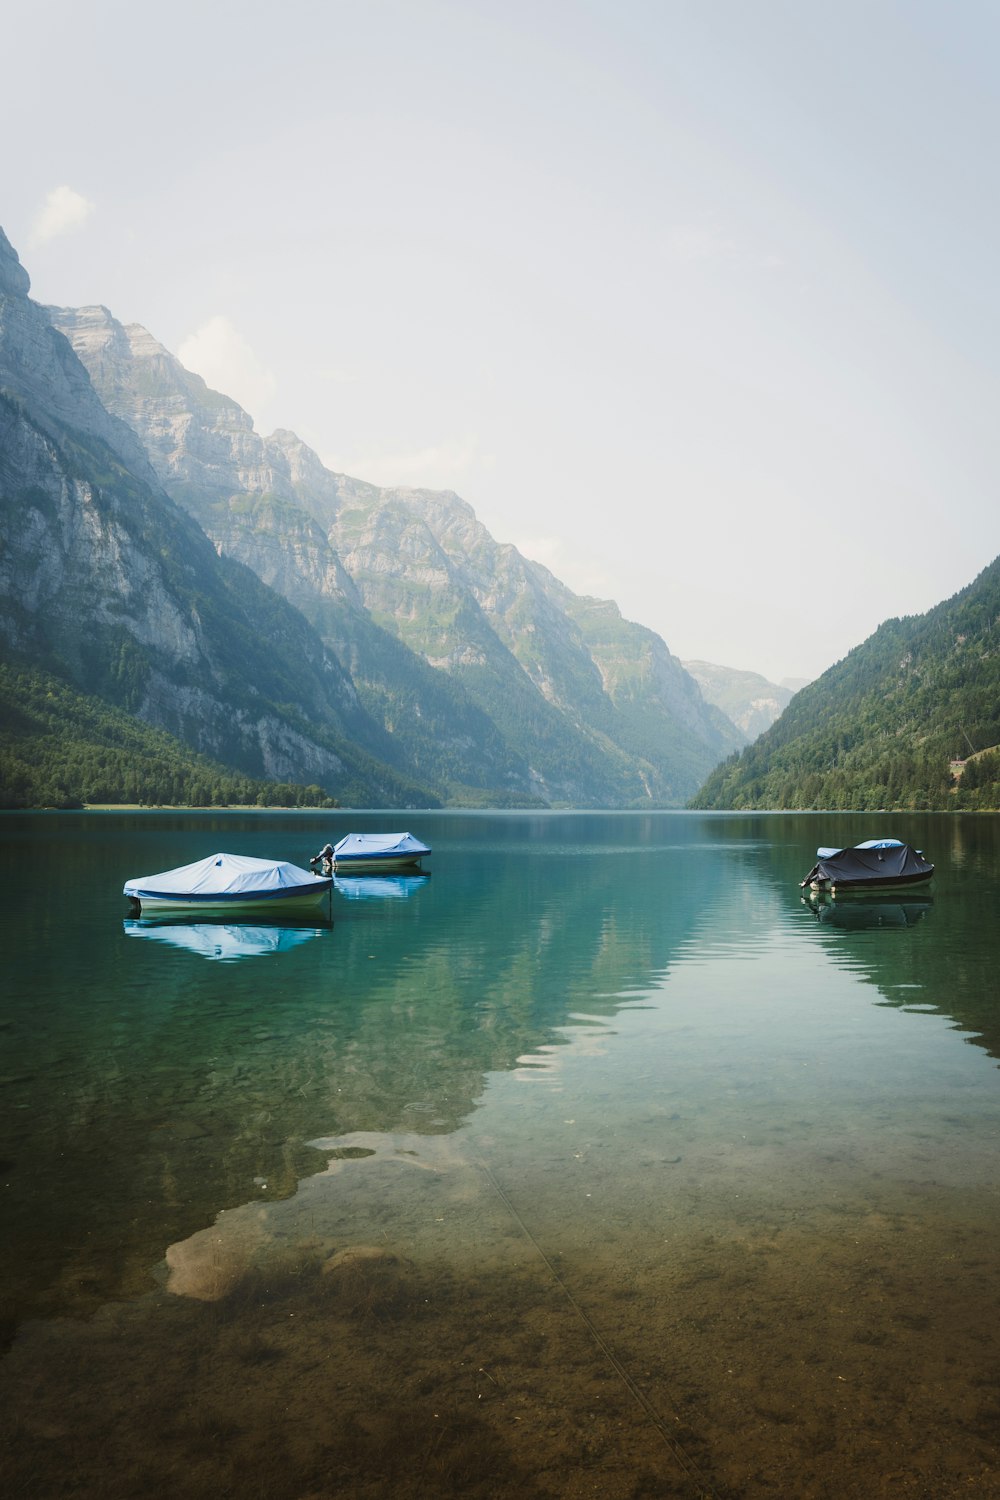 two boats floating on a lake surrounded by mountains